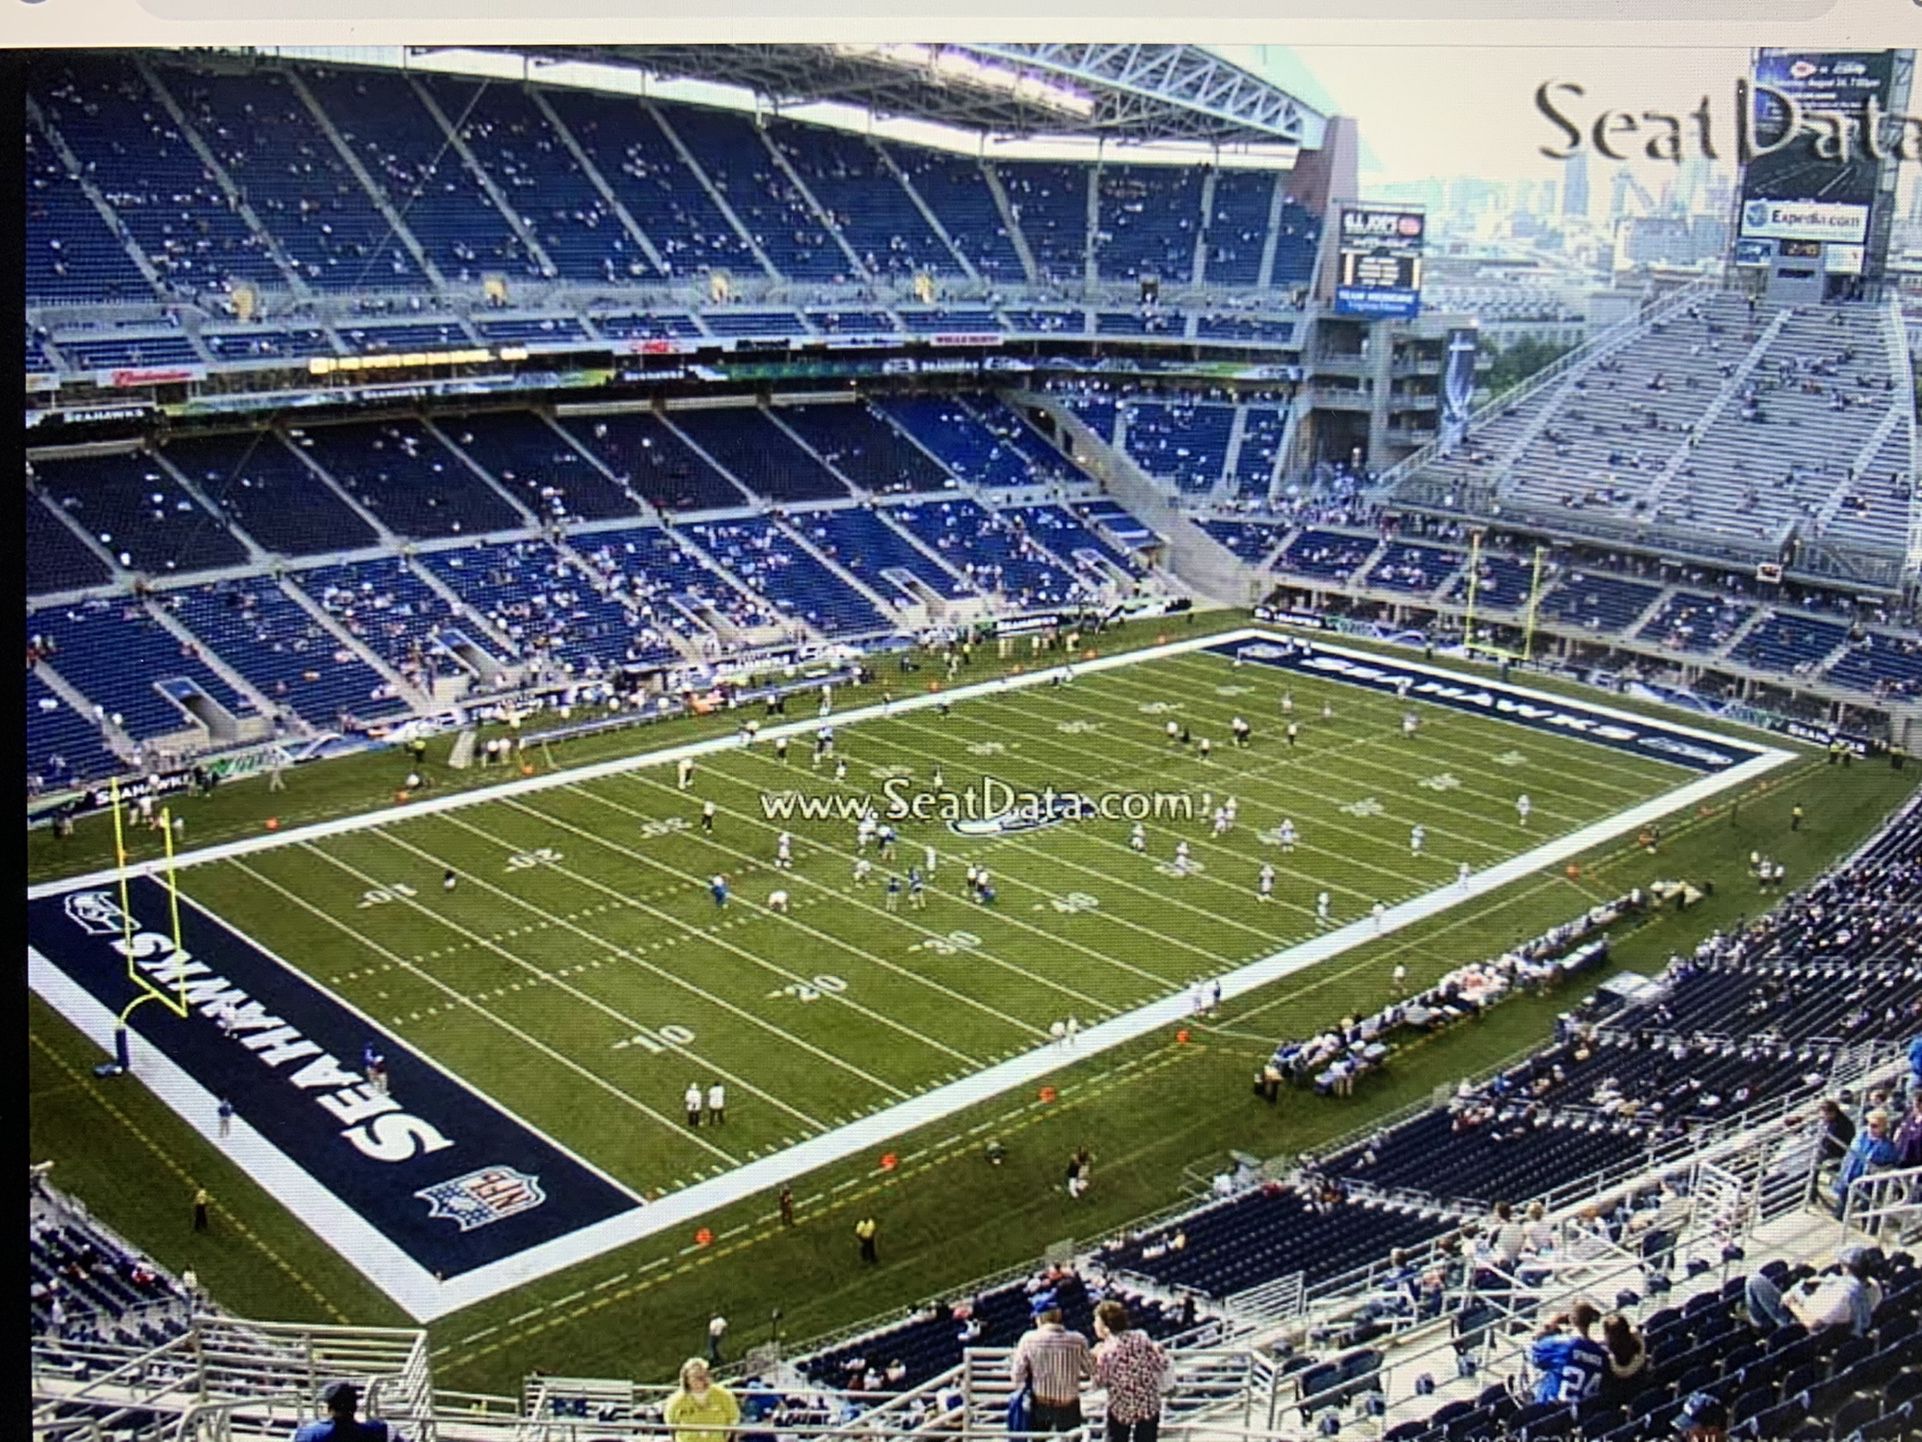 Two Seahawks Tickets $150 Total